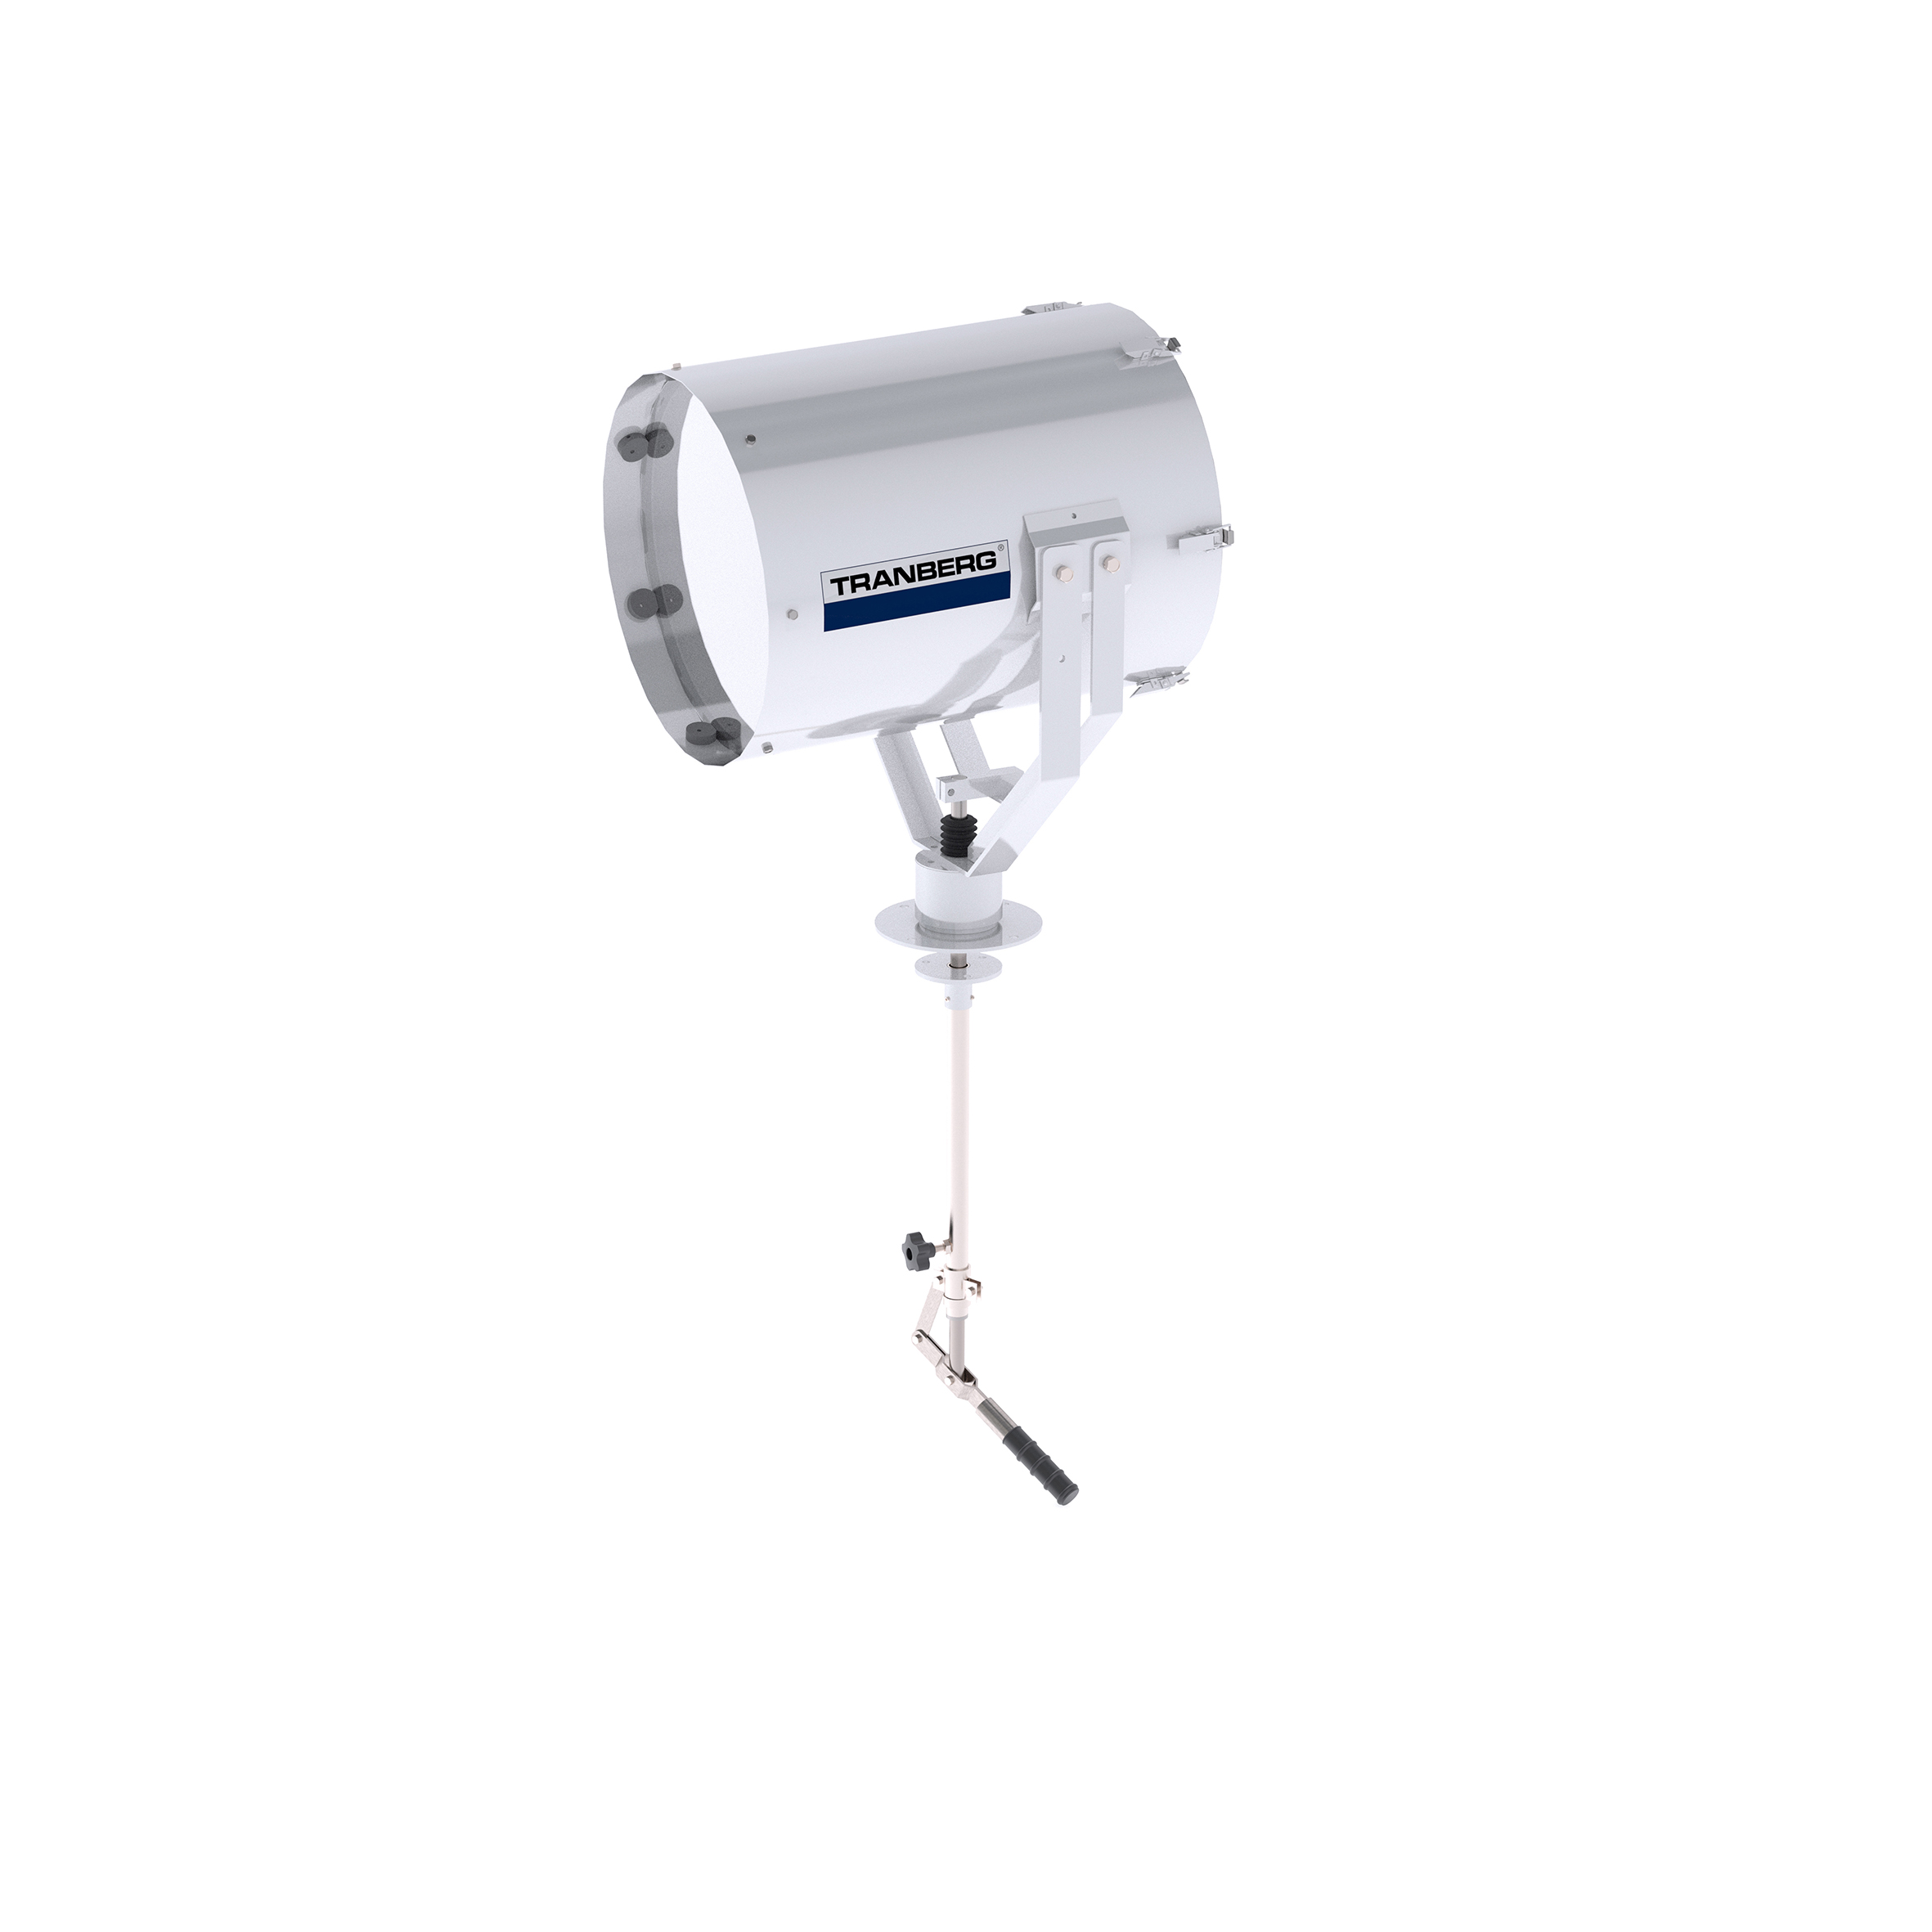 TEF 2630 Searchlight: Halogen 1000W bulb incl, 120V, Bridge Controlled, Stainless Steel